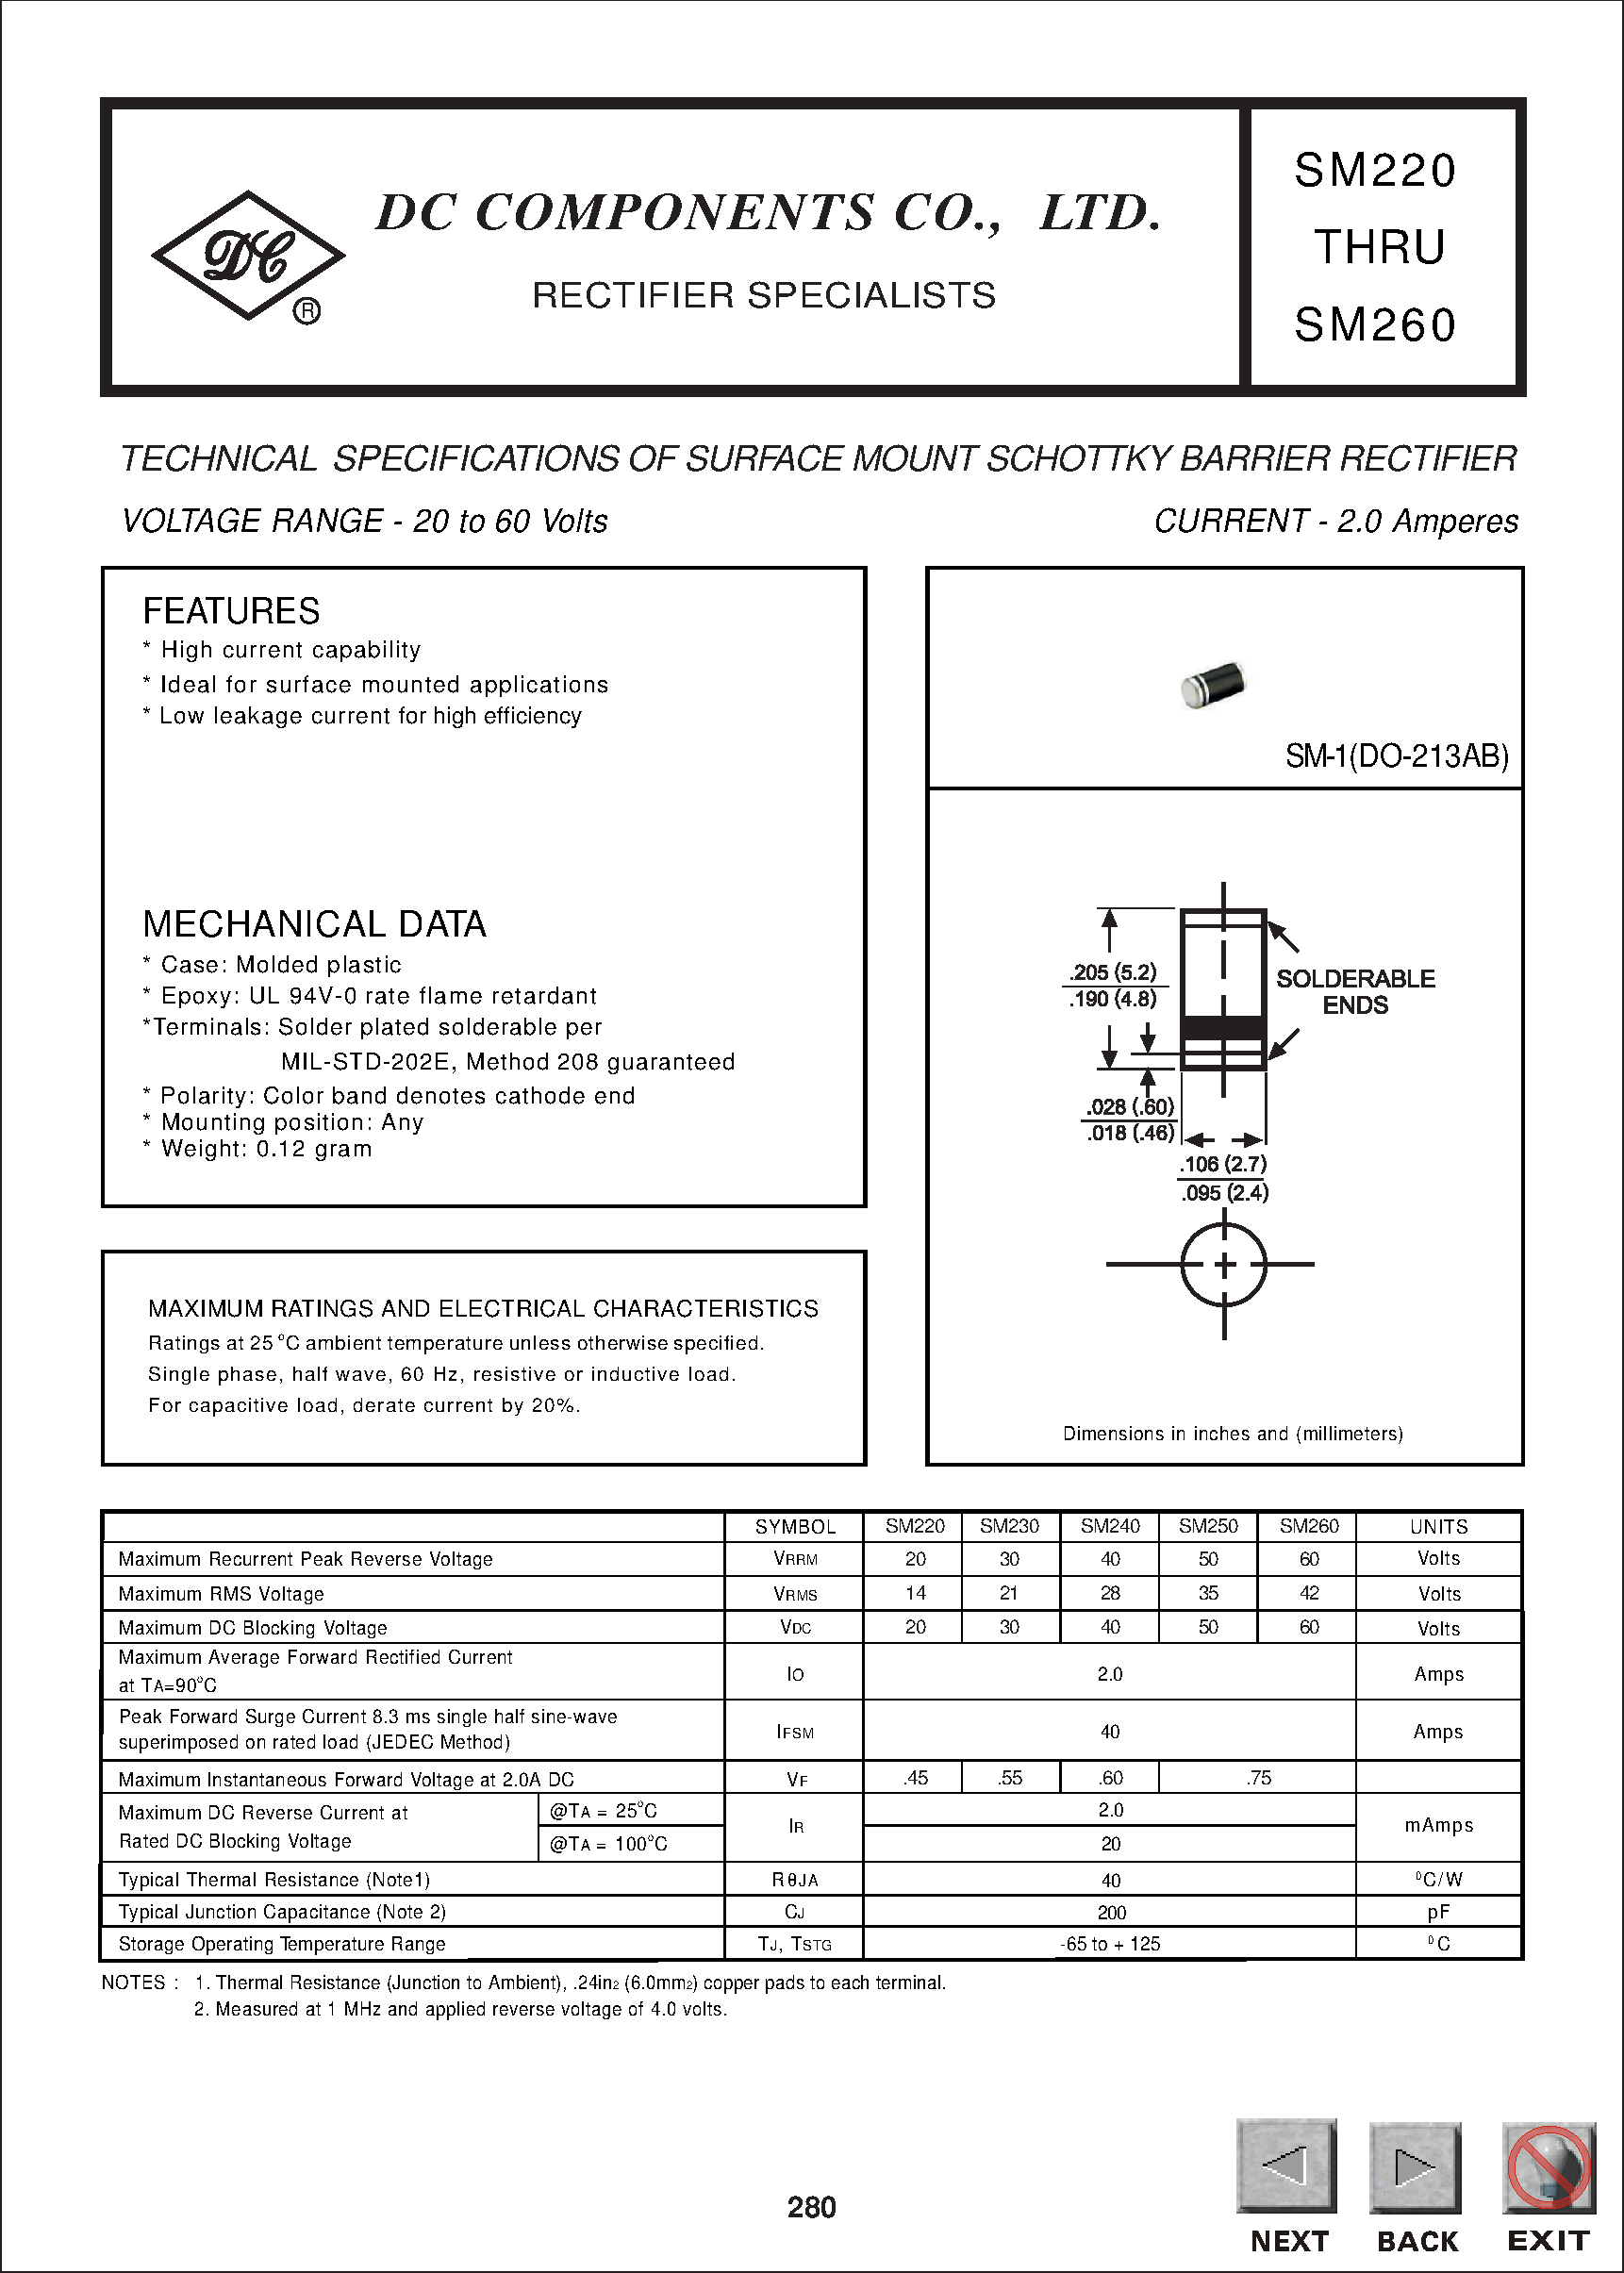 Даташит SM230 - TECHNICAL SPECIFICATIONS OF SURFACE MOUNT SCHOTTKY BARRIER RECTIFIER страница 1